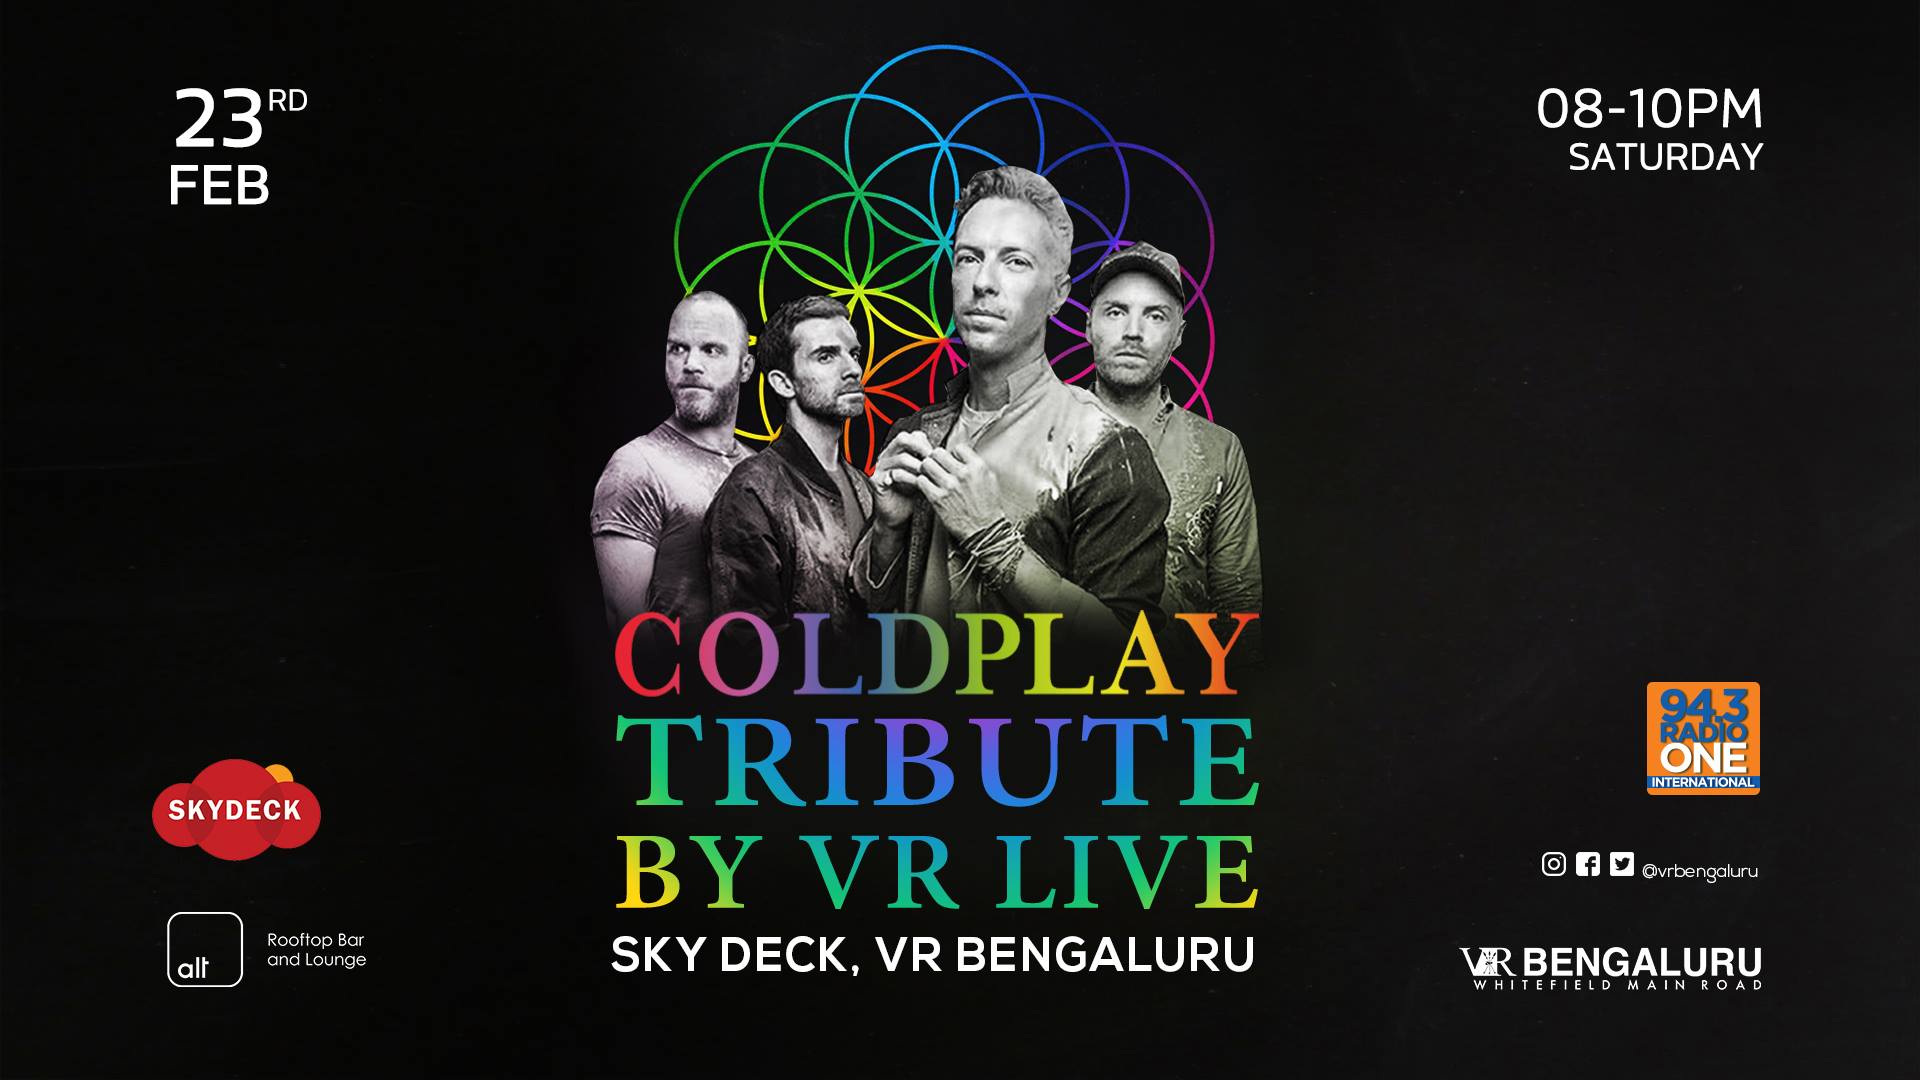 Coldplay Tribute by VR Live